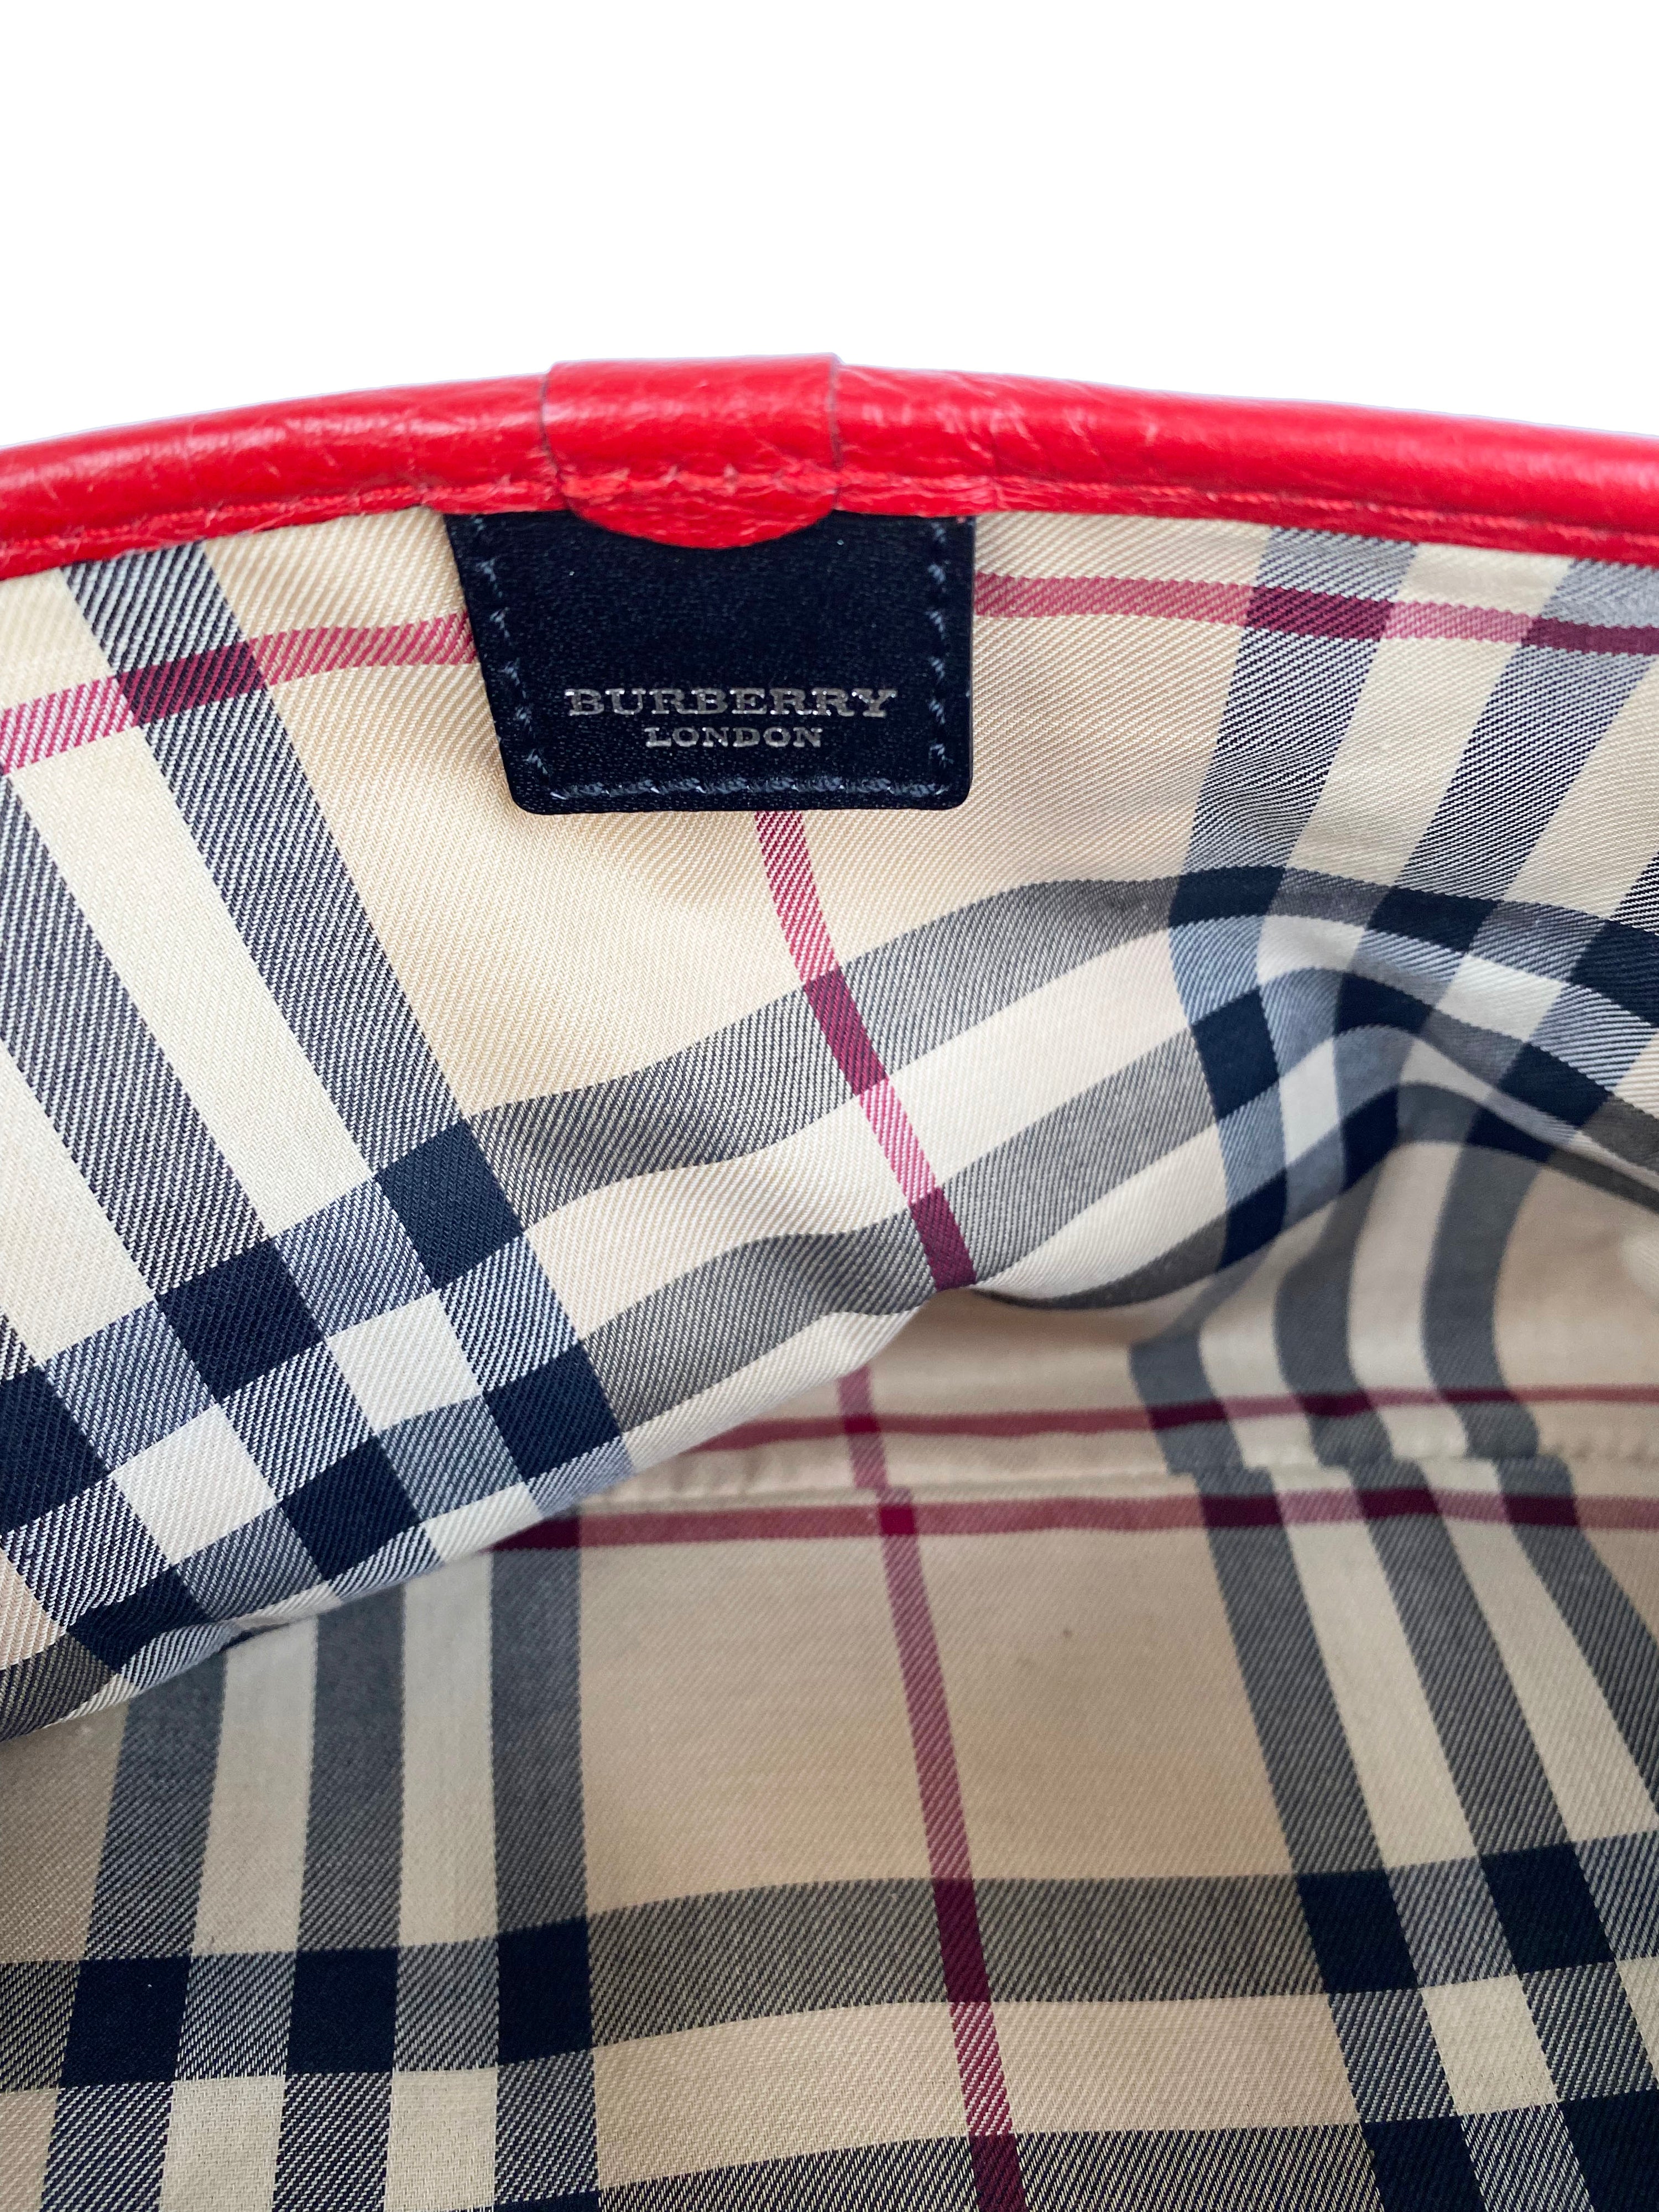 Burberry Small Red Vintage Bag